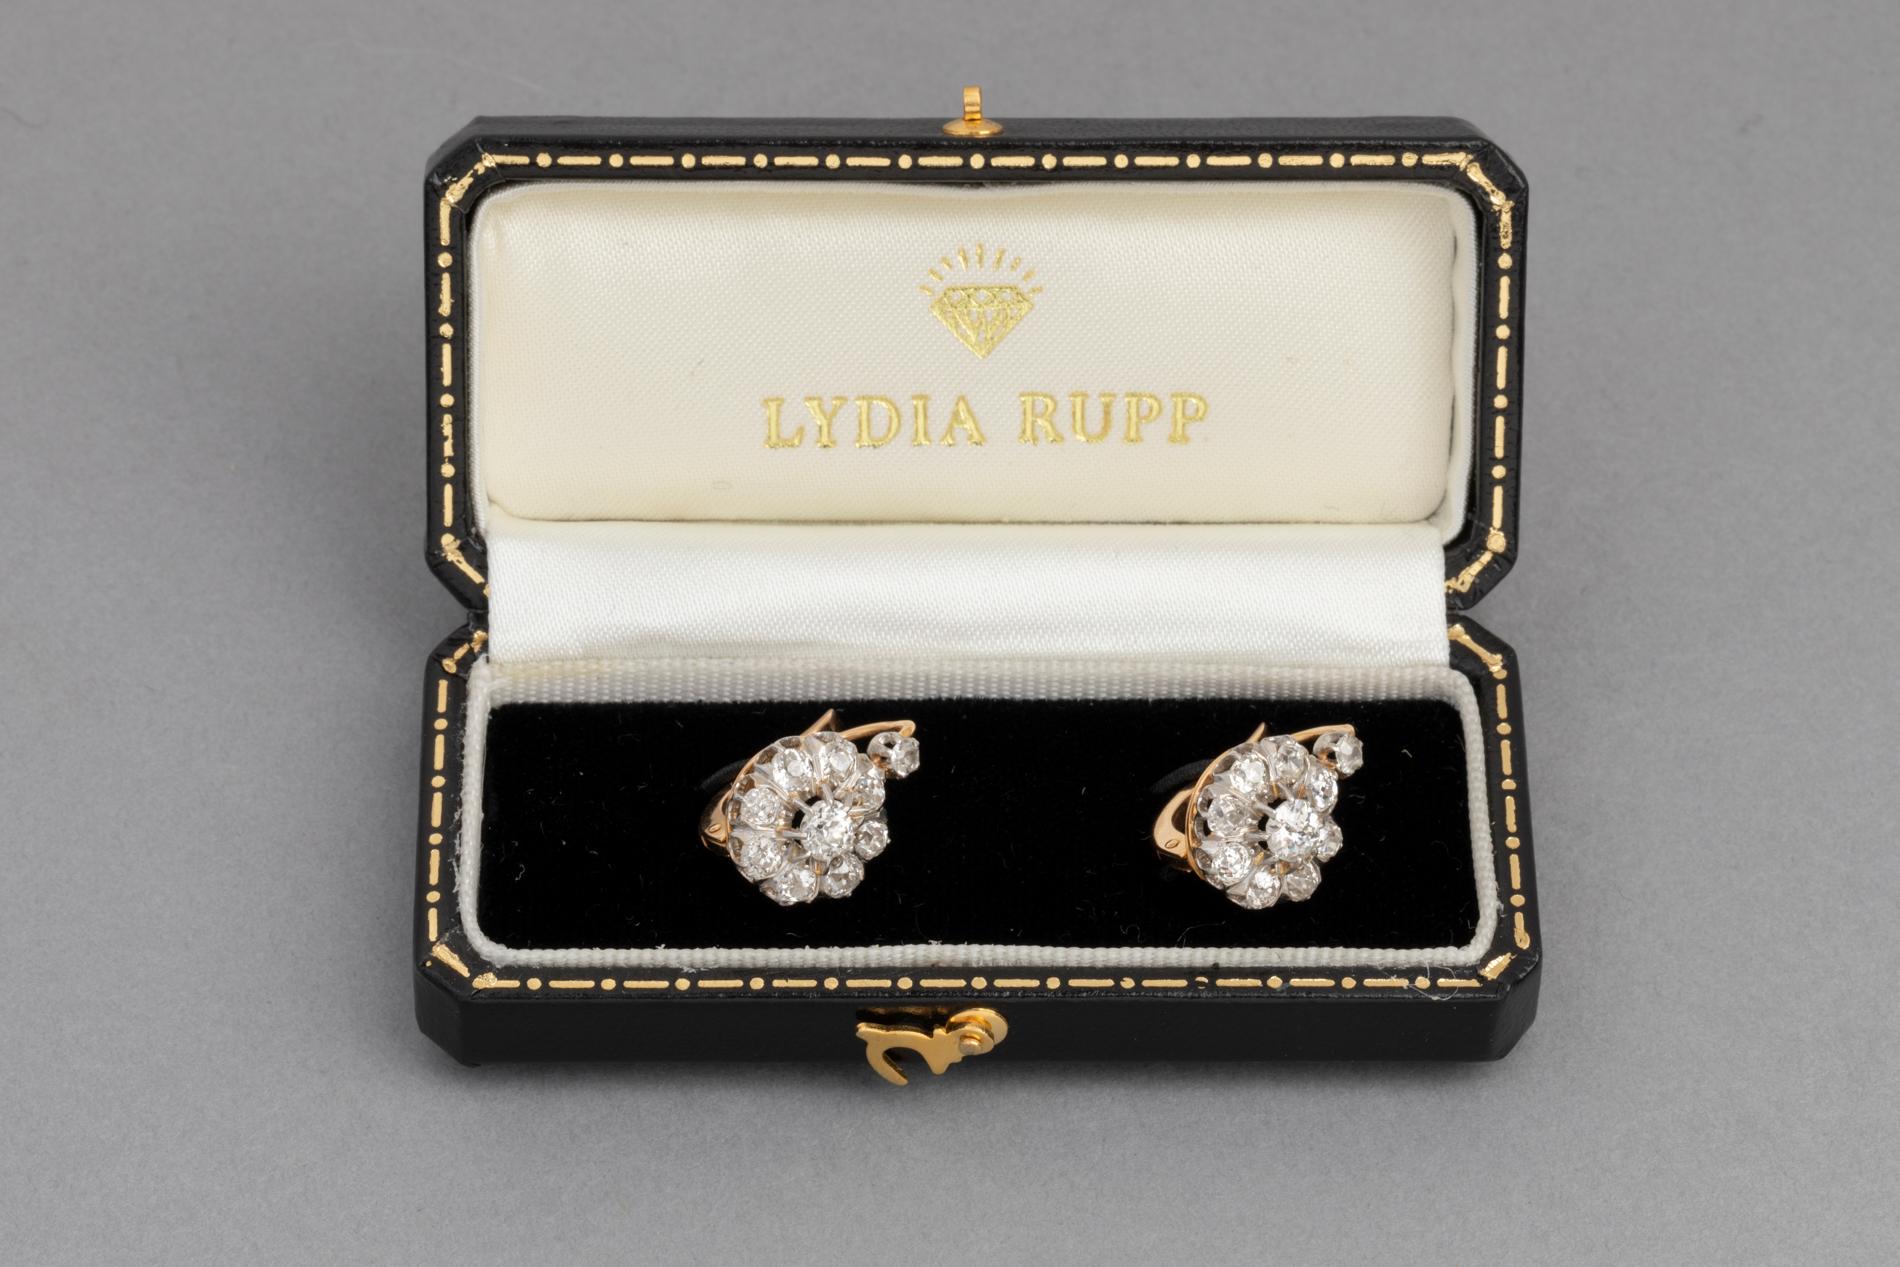 2 Carats Antique French Earrings, Gold Platinum and Diamonds

Very lovely pair of Belle Epoque earrings, made in France circa 1900.  
The system is Sleepers / Dormeuses.  
The earrings are mounted with Gold 18K and Platinum.   
The size of the